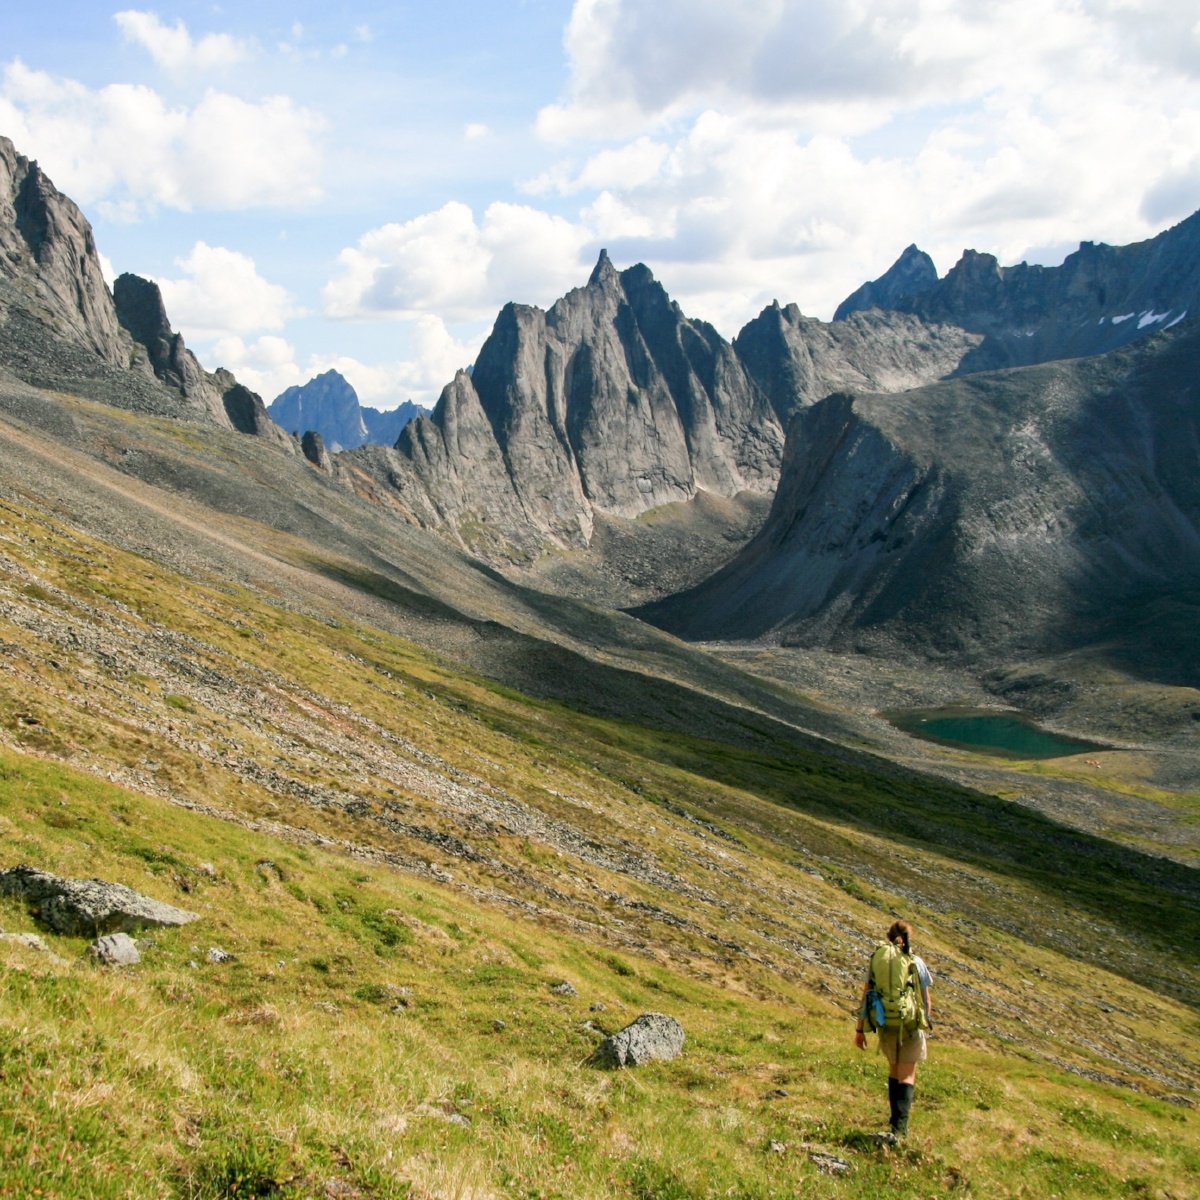 A hiker walks across the side of a valley with steep mountains in the background